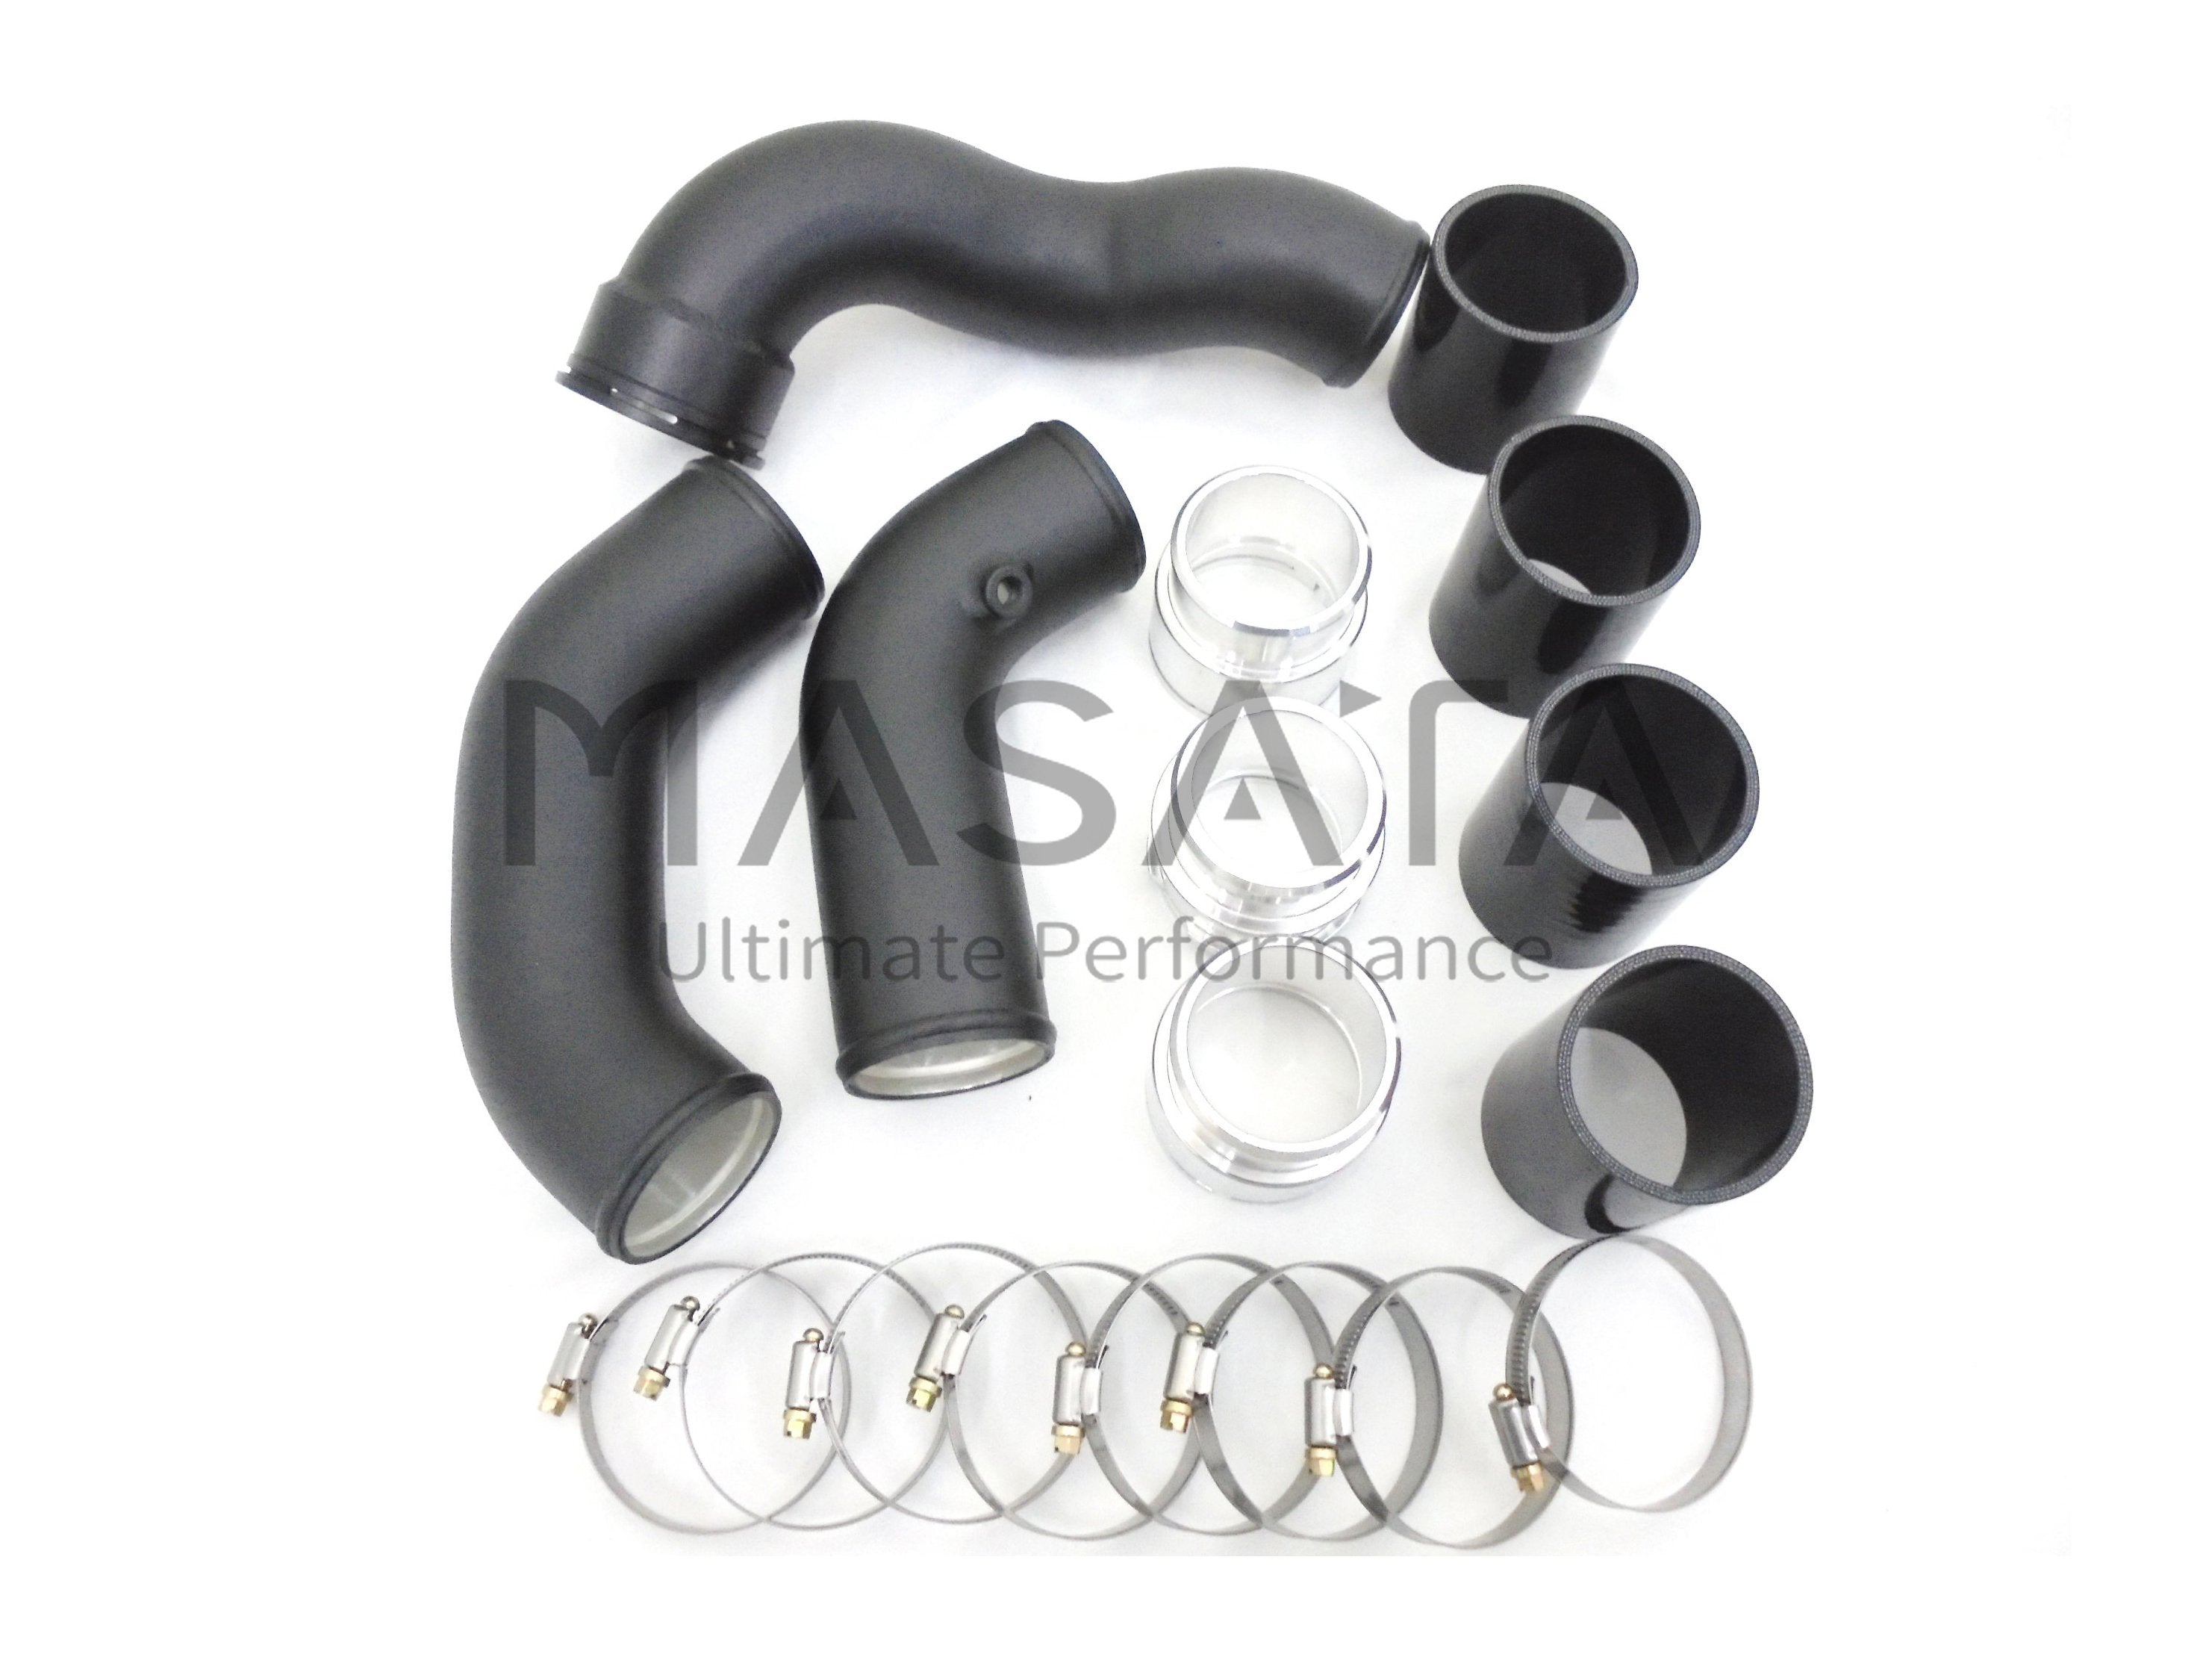 Mercedes-Benz A250 (W176 M270) Chargepipe Masata UK